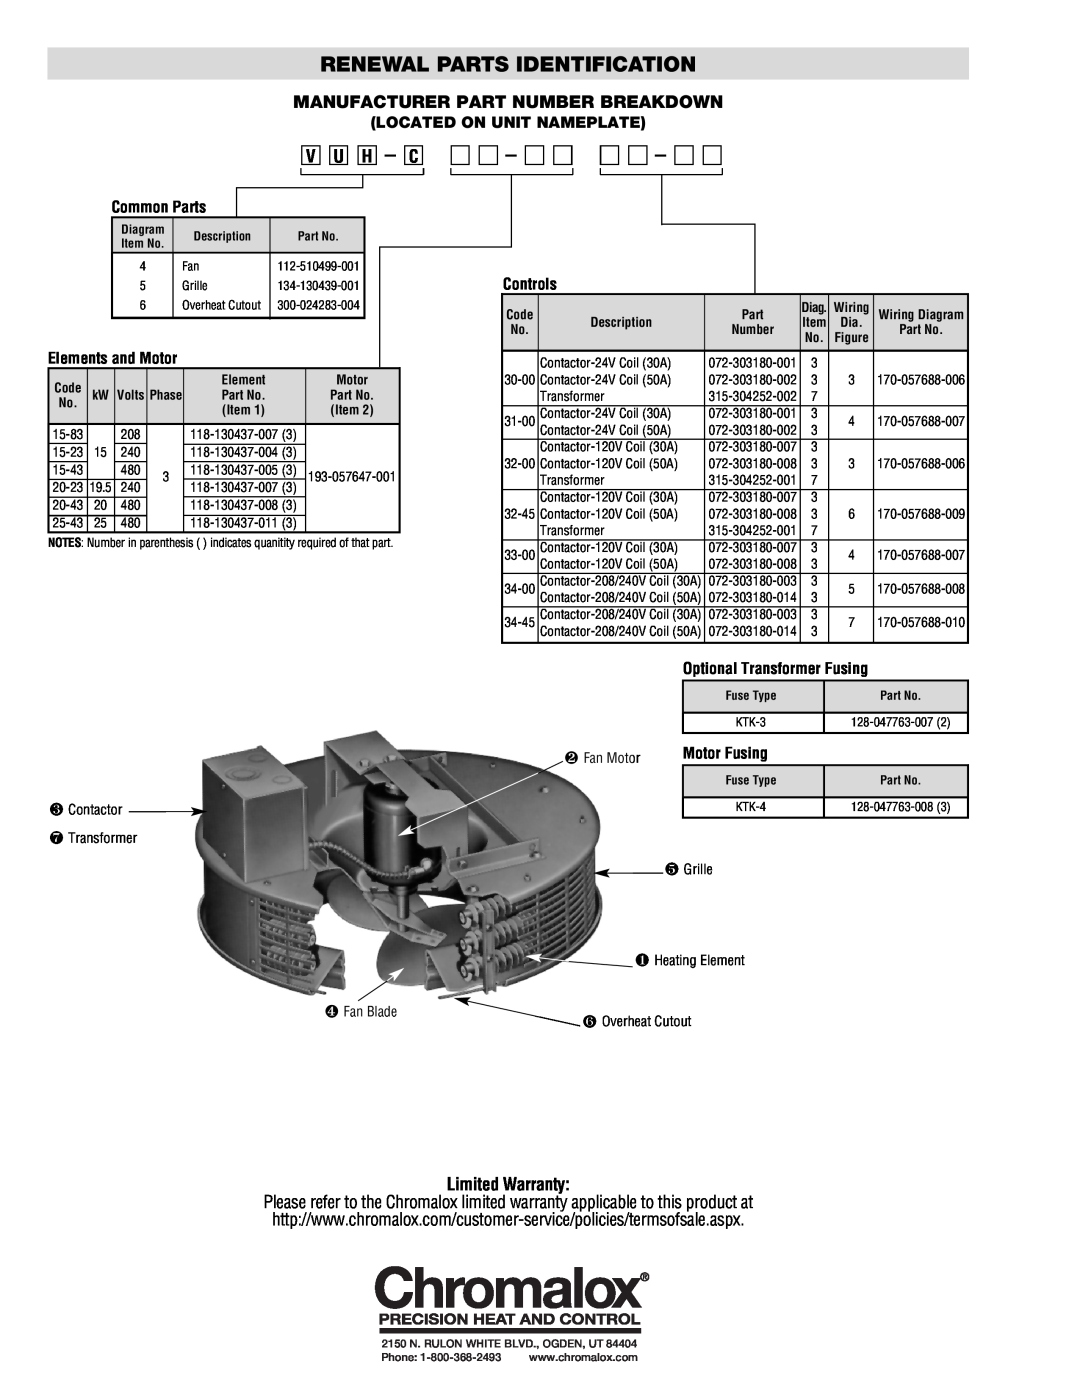 Chromalox PF451-3 specifications Renewal Parts Identification, Manufacturer Part Number Breakdown, Limited Warranty 